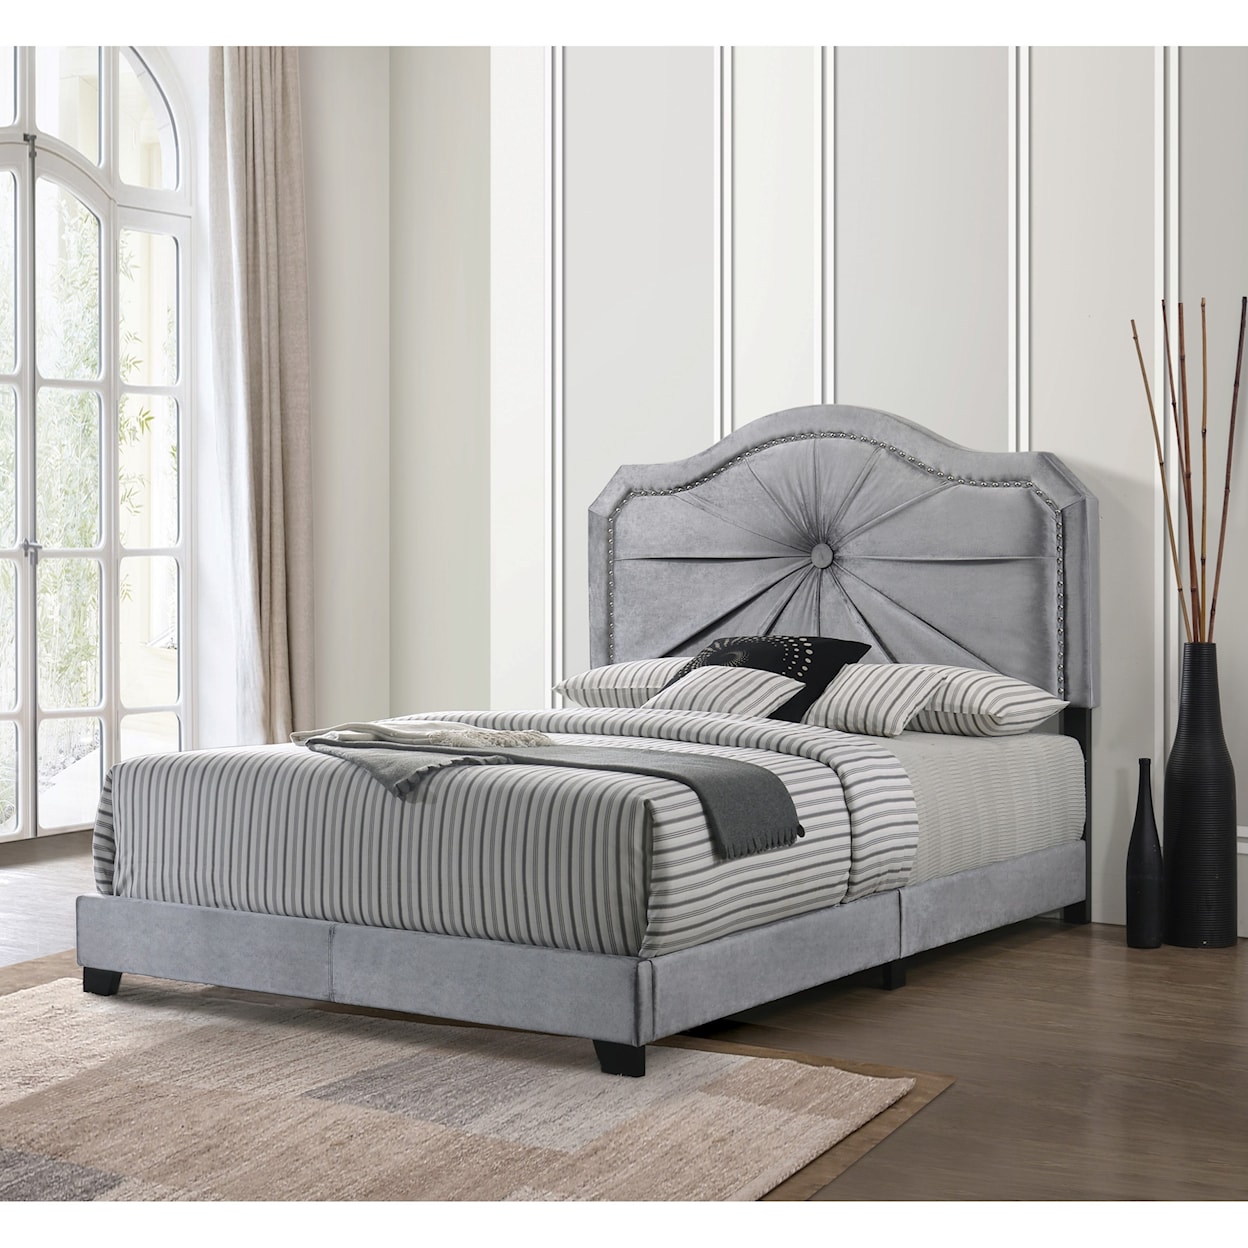 Acme Furniture Frankie Queen Bed